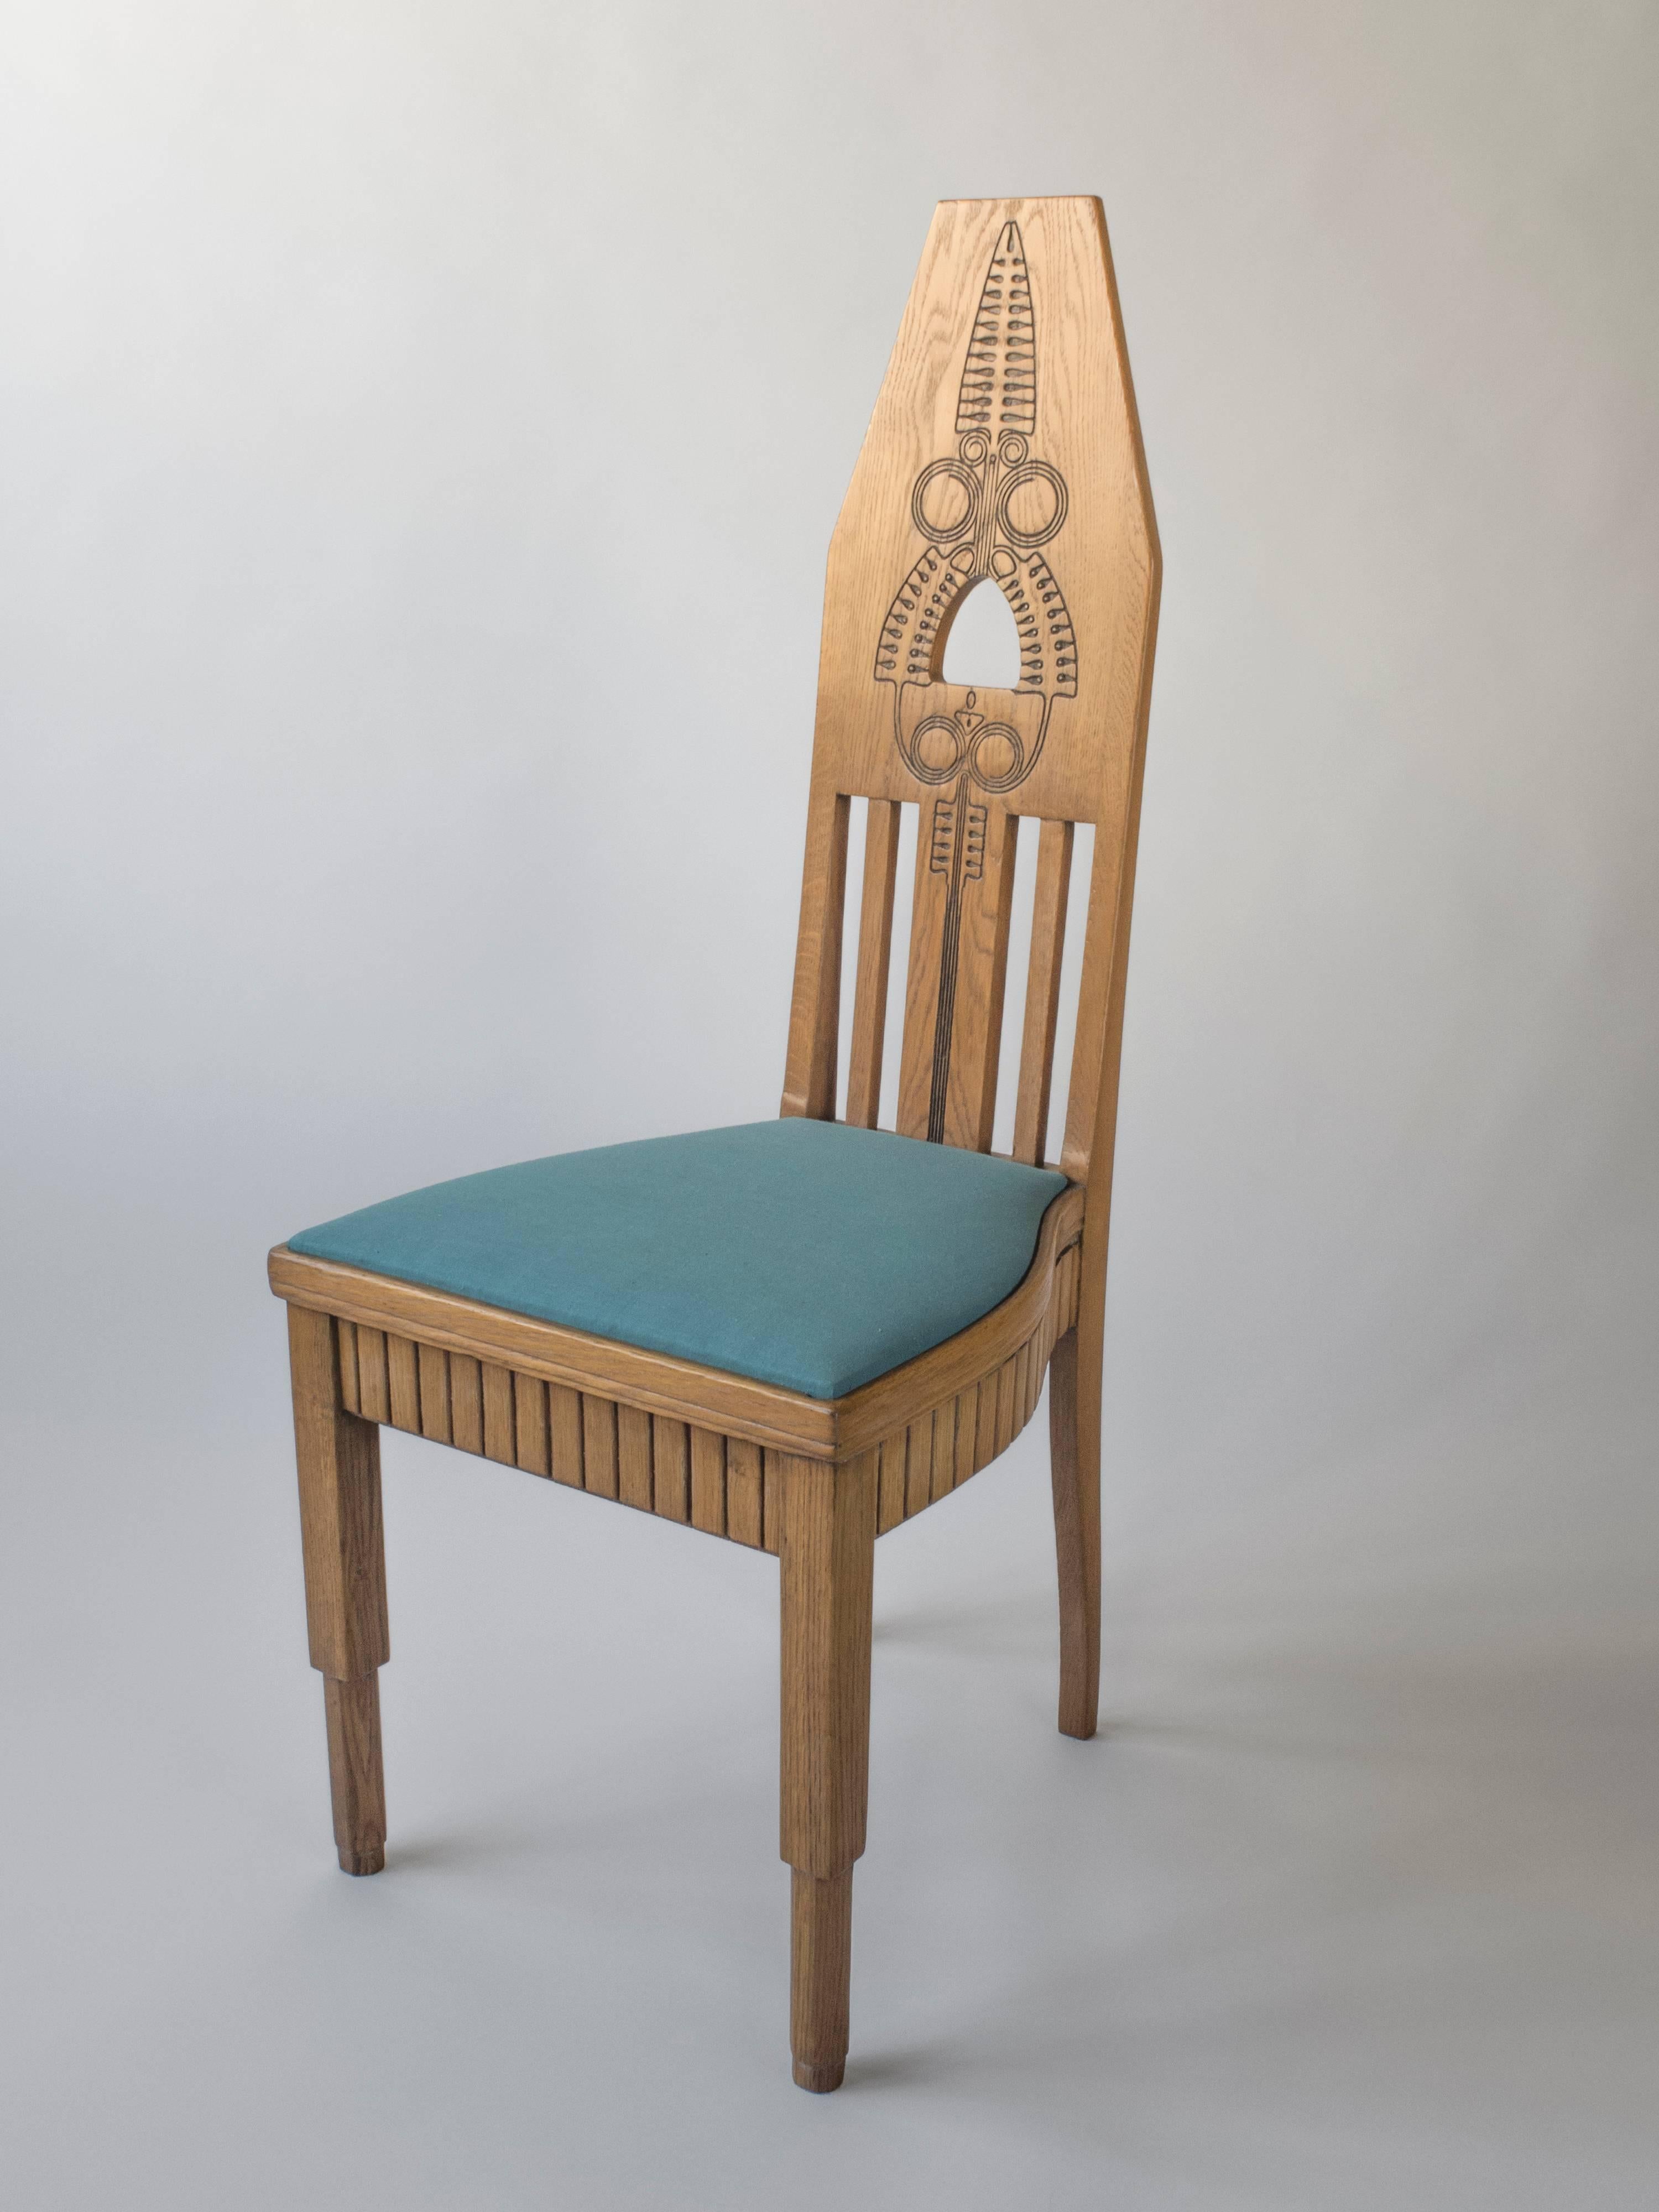 Typical of Nordic, and in particular Finnish Jugend / Art Nouveau works, the chairs boldly play on geometric forms and local, natural motifs. Each chair beautifully hand-carved. The linear top-rail, surmounting a tall and thin backrest adorned in